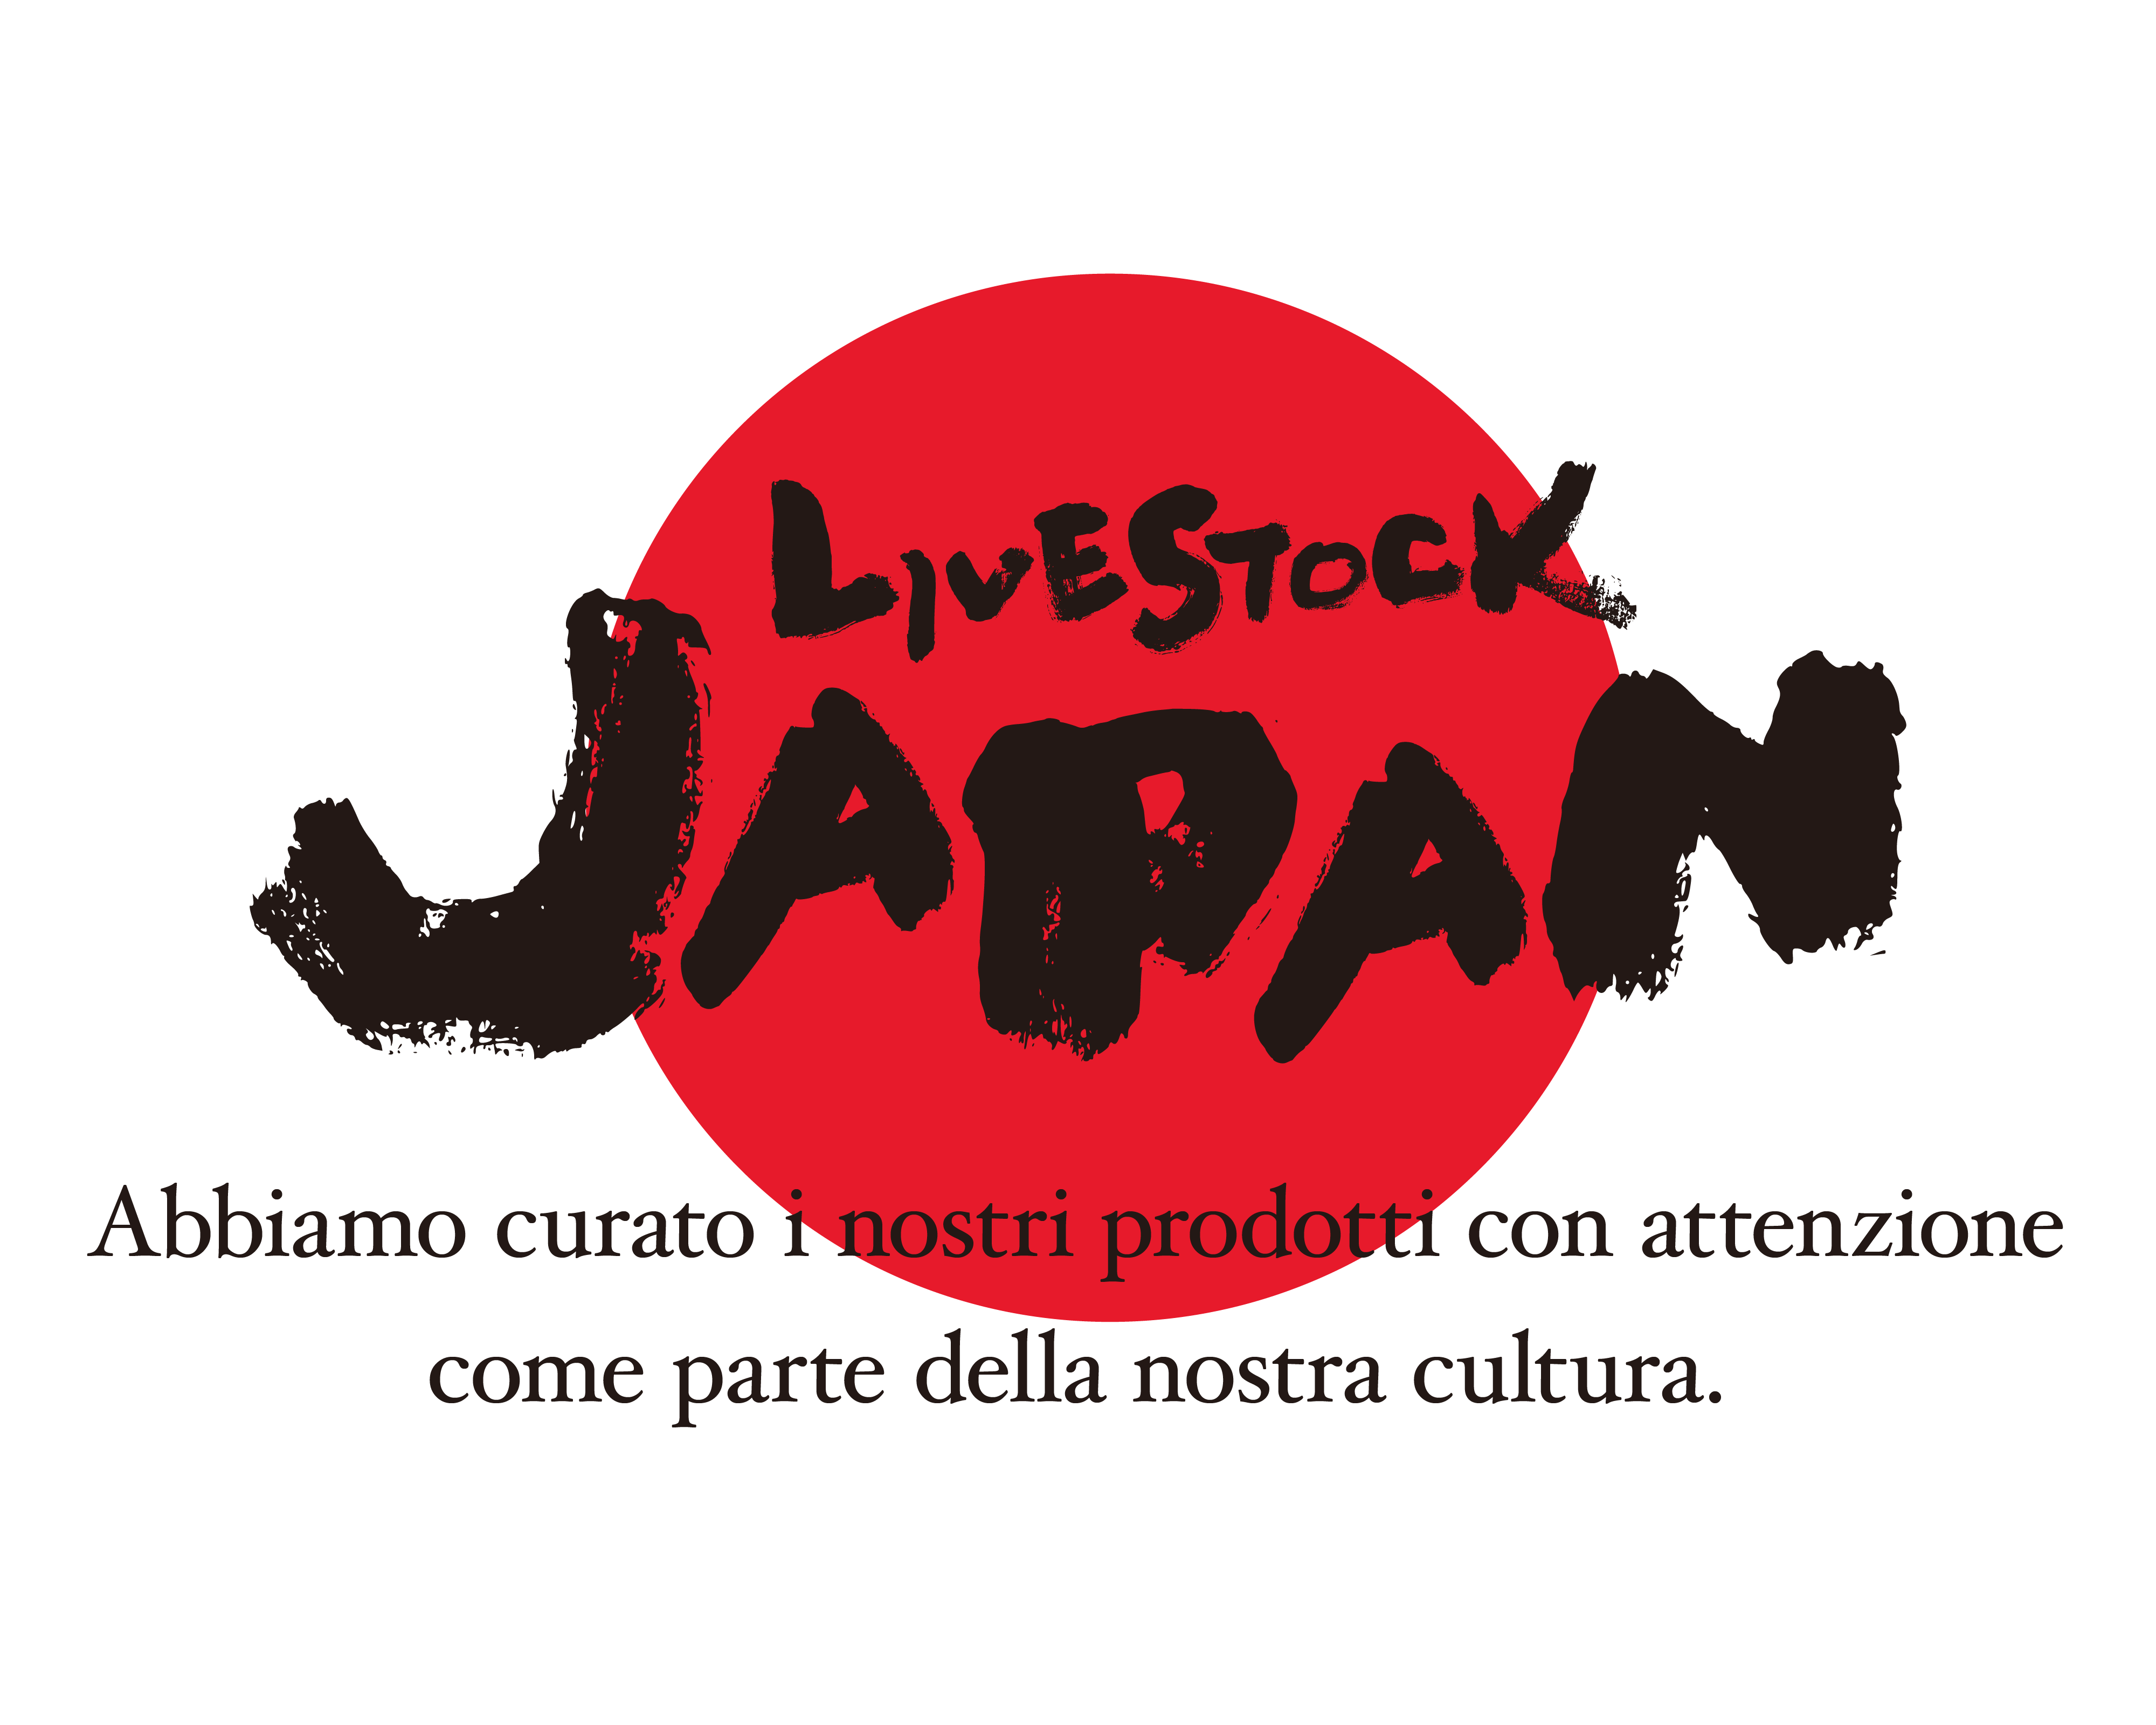 Japan Livestock Products Export Promotion Council